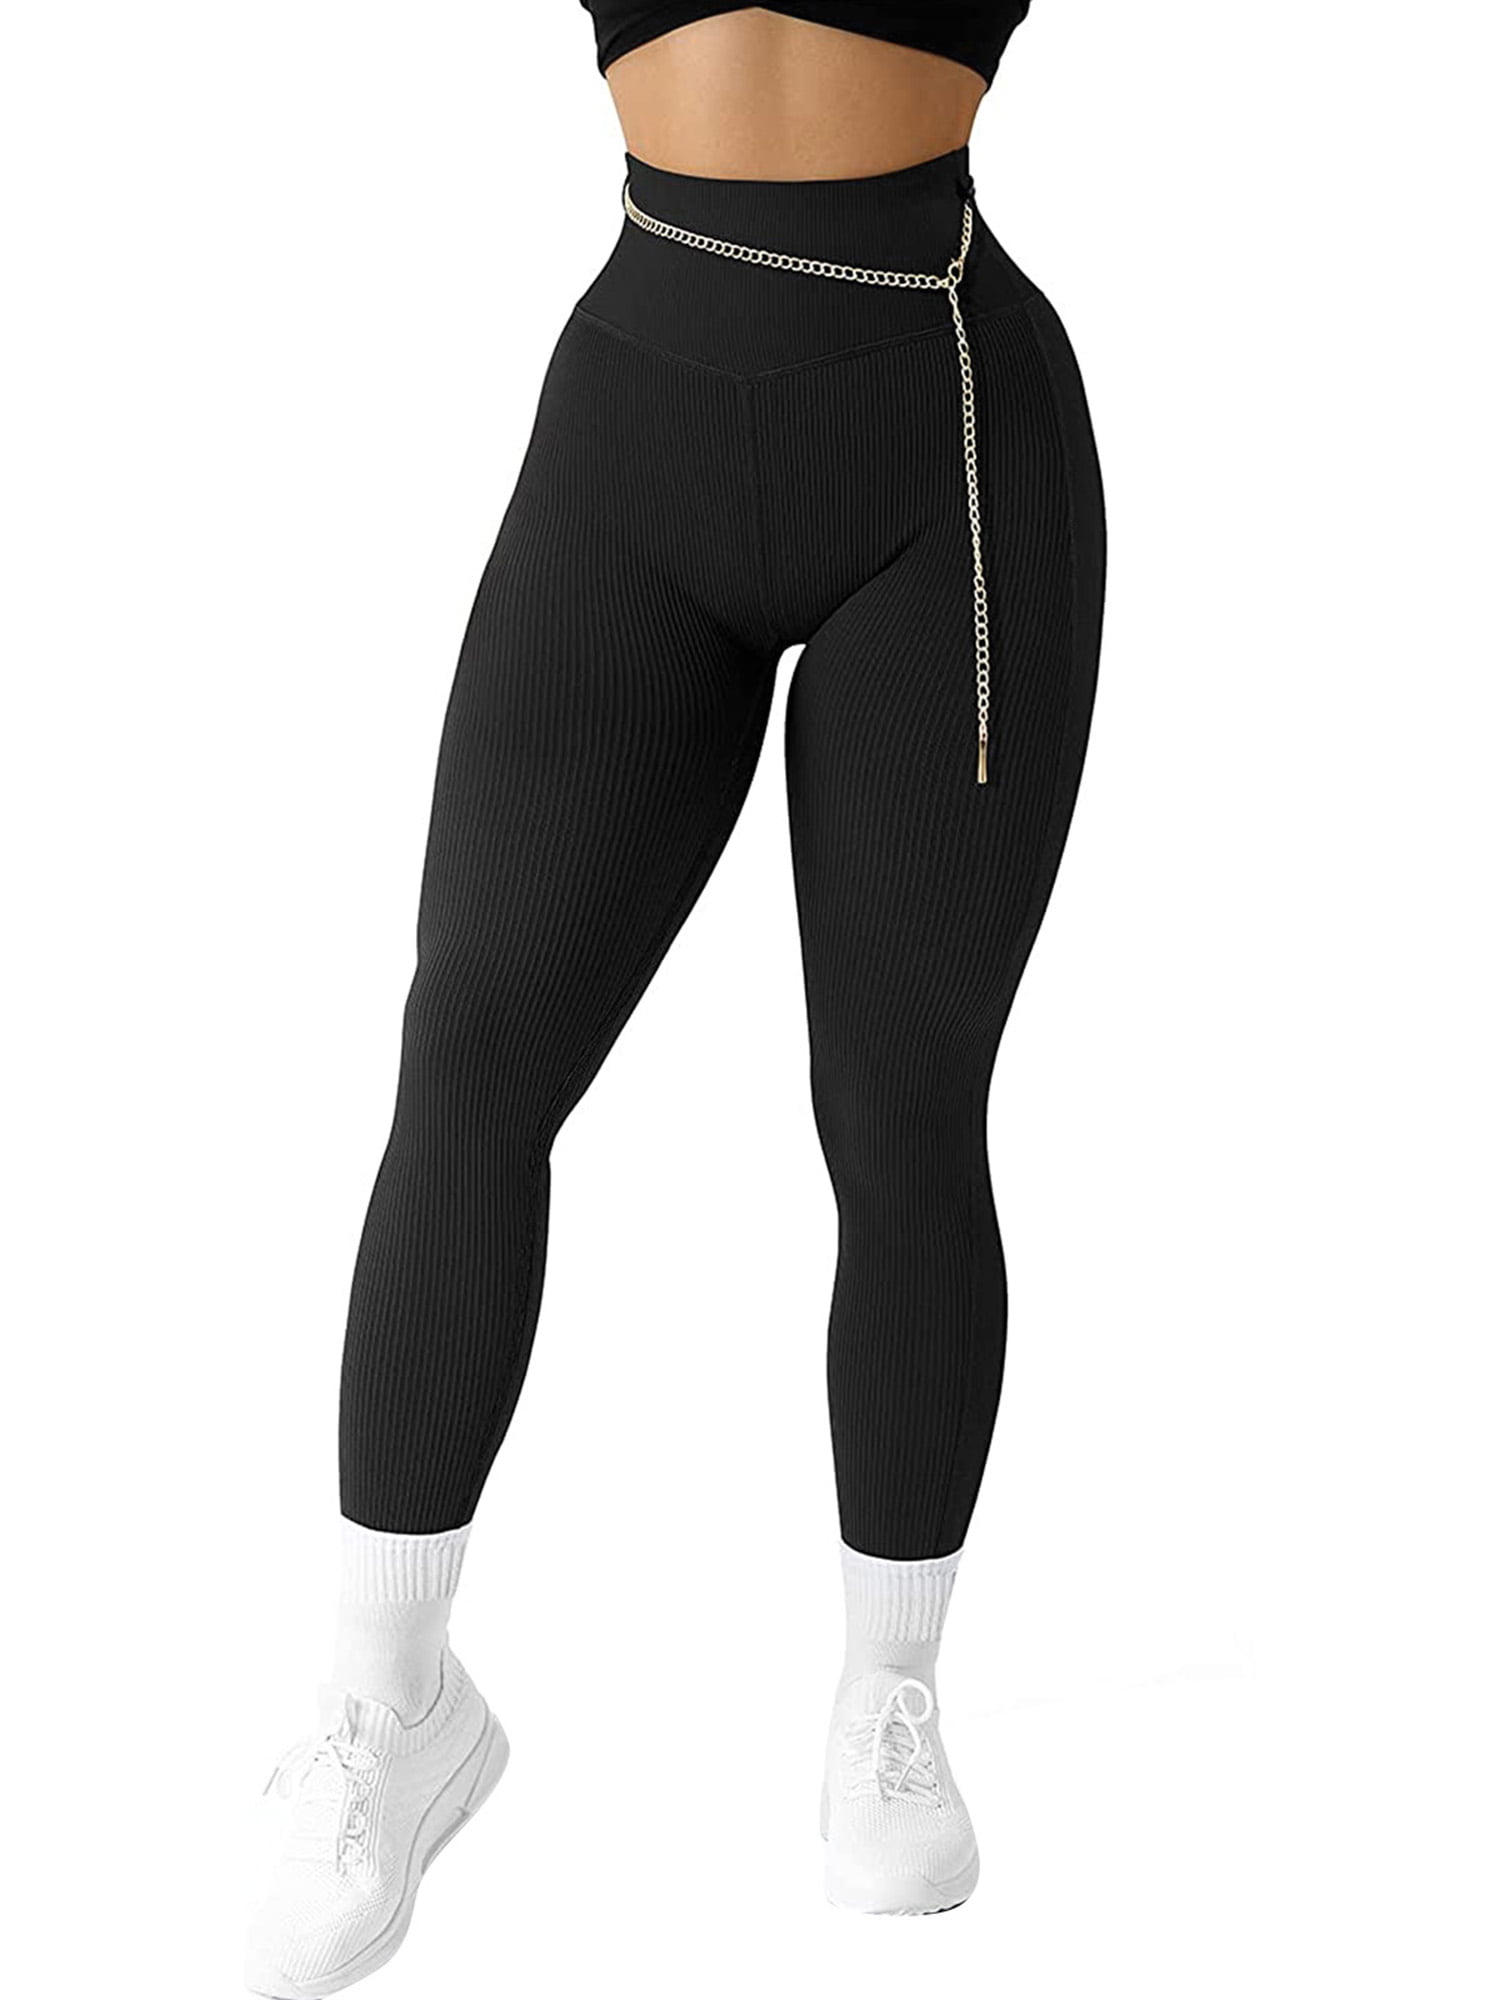 Pants & Jumpsuits, Nwt Ultra High Waist Spandex Shaping Active Wear  Leggings Lxl Gxg16